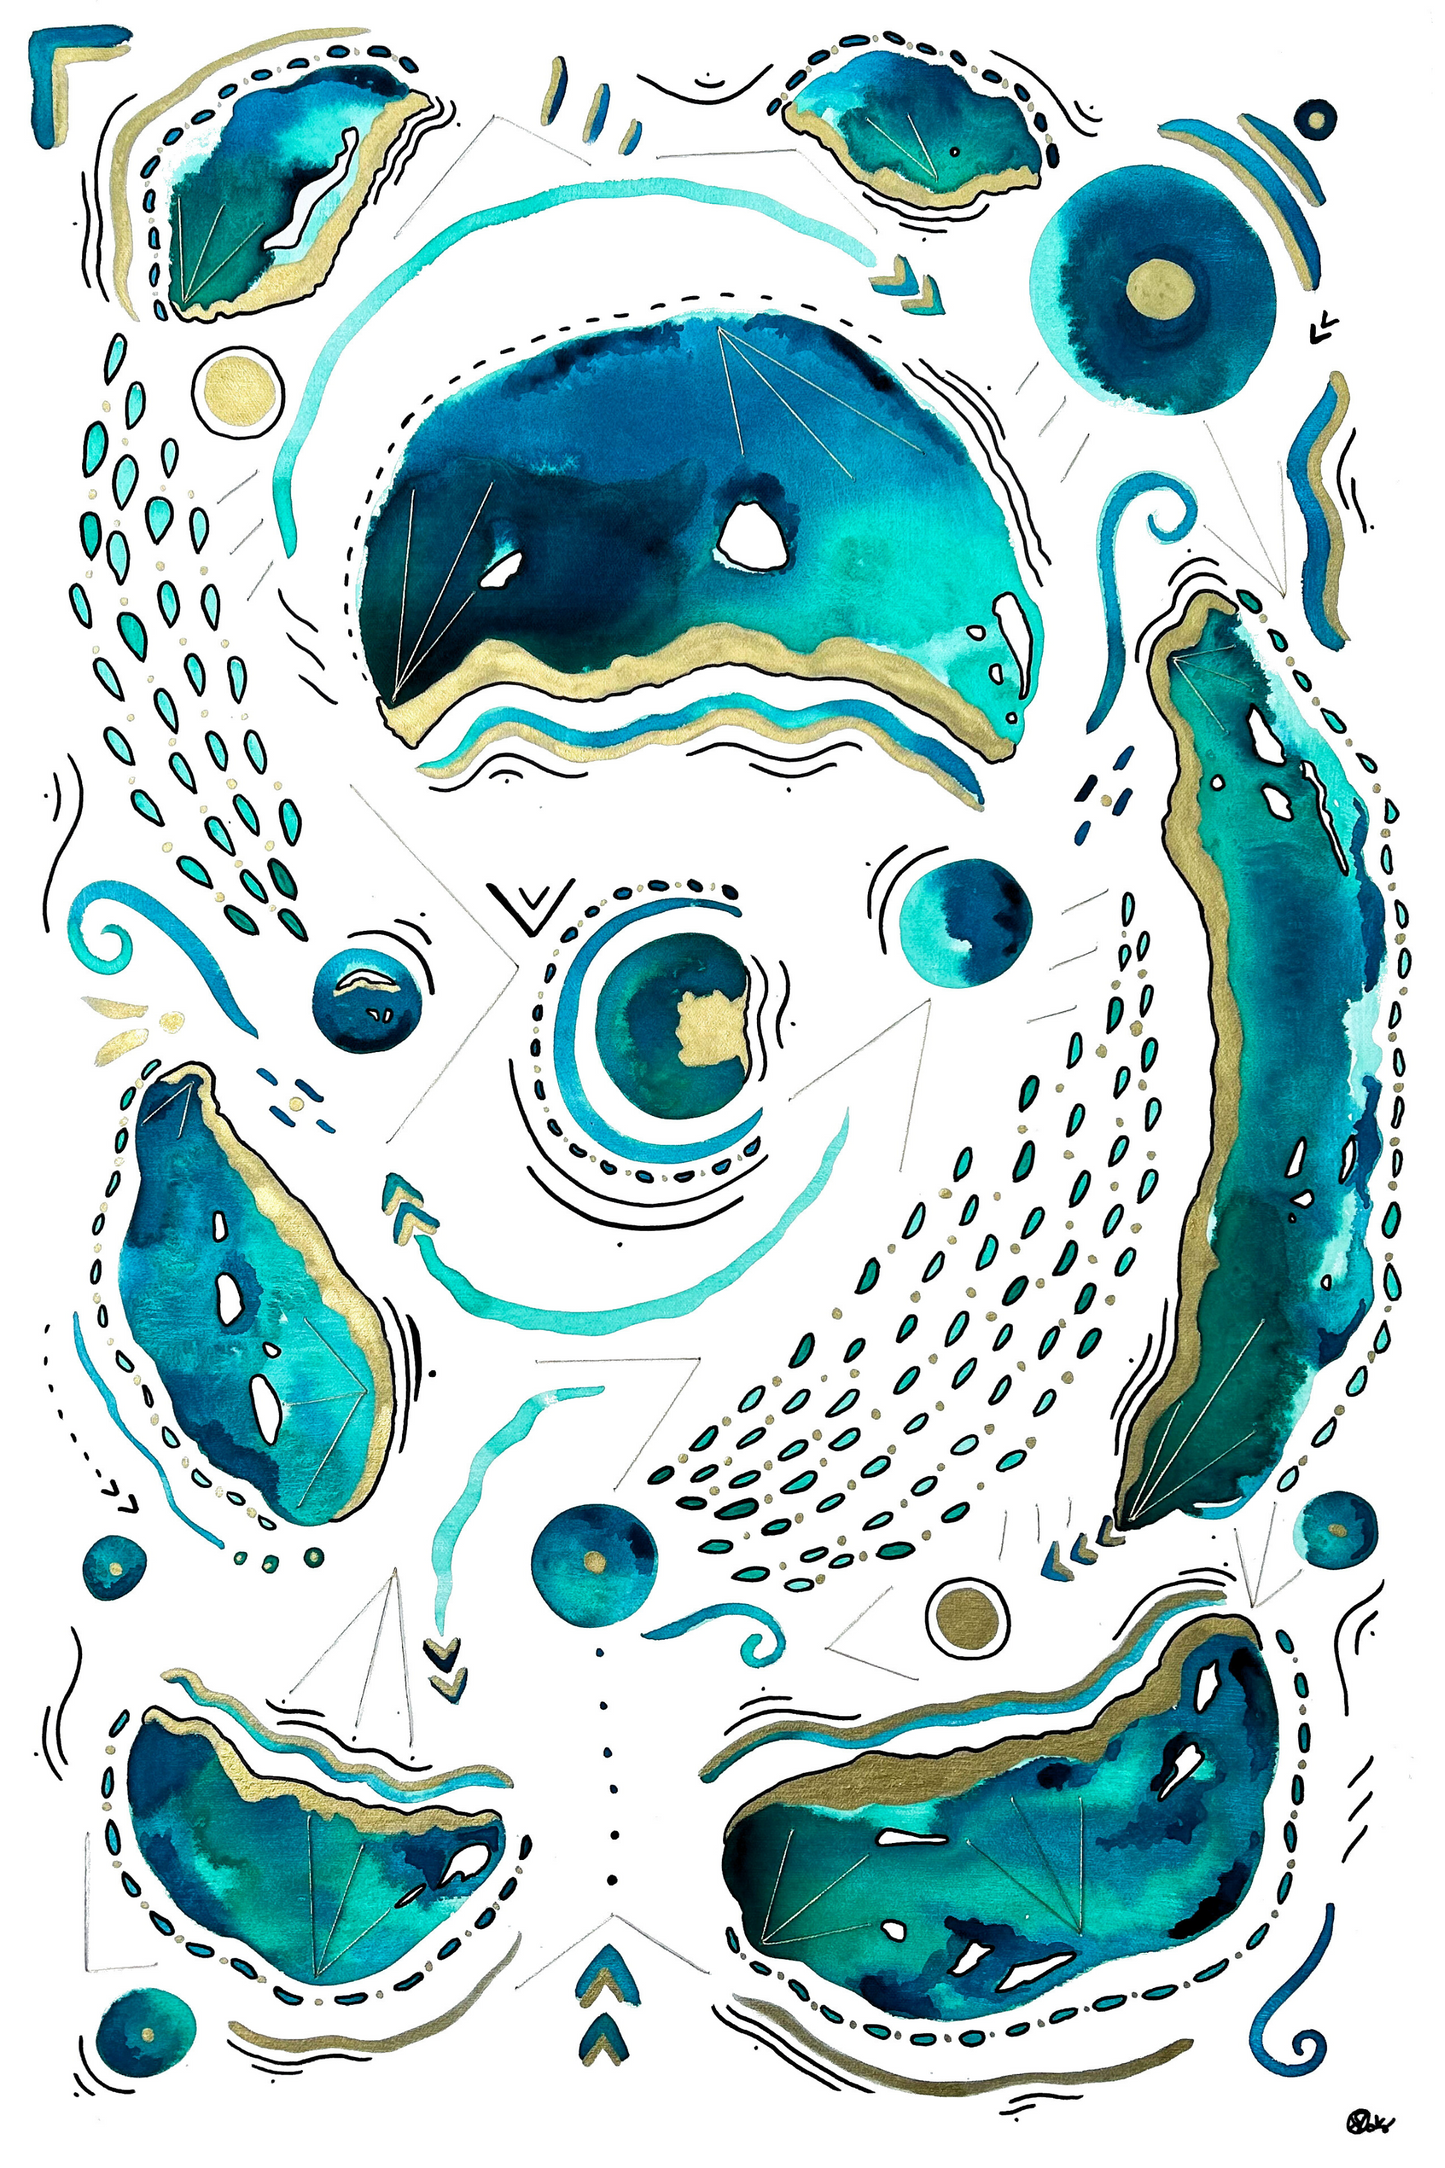 Amado's Reef - Original Watercolor, Ink, & Thread Painting on Canvas - Teal & Gold